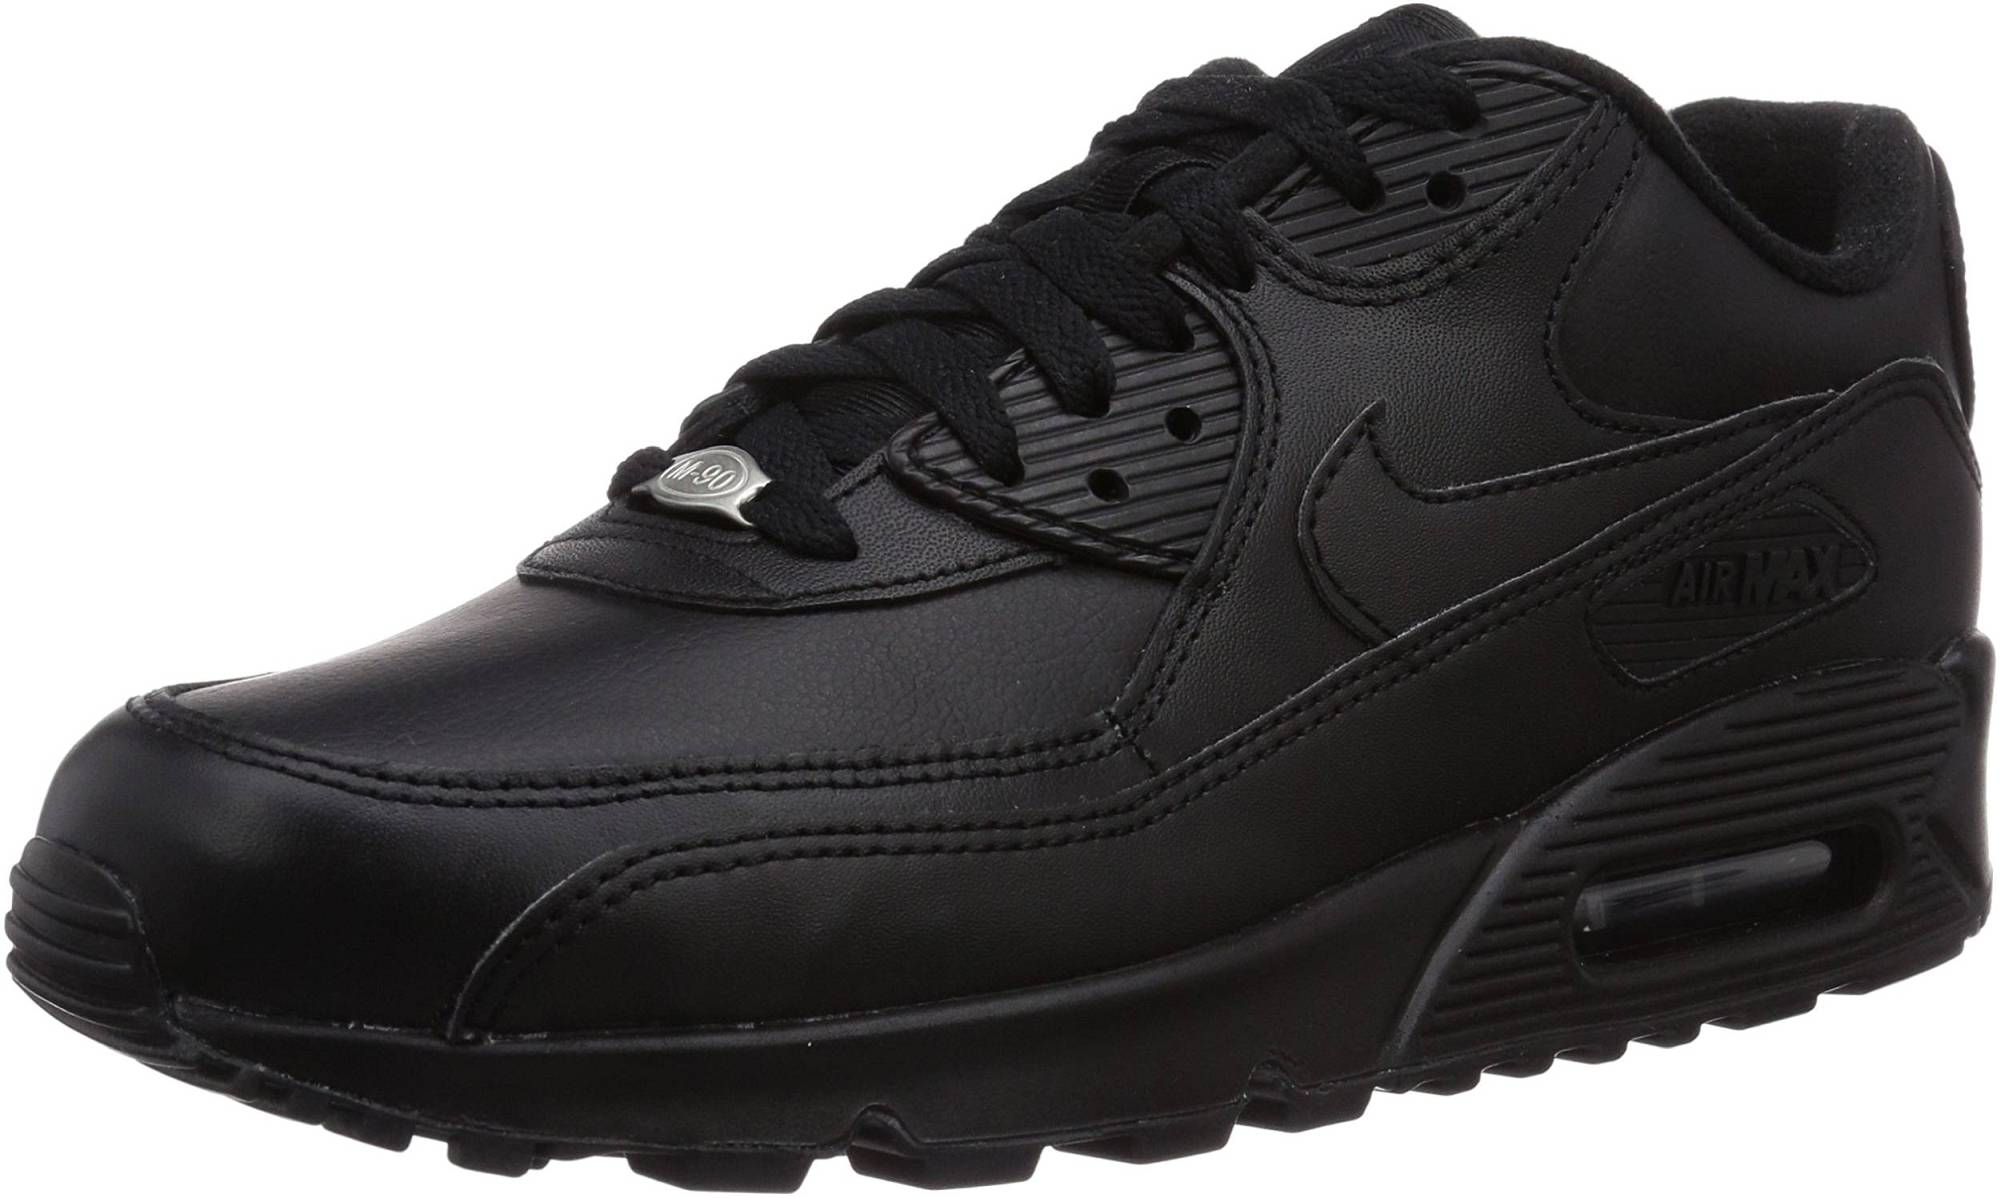 Nike Air Max 90 Leather – Shoes Reviews & Reasons To Buy